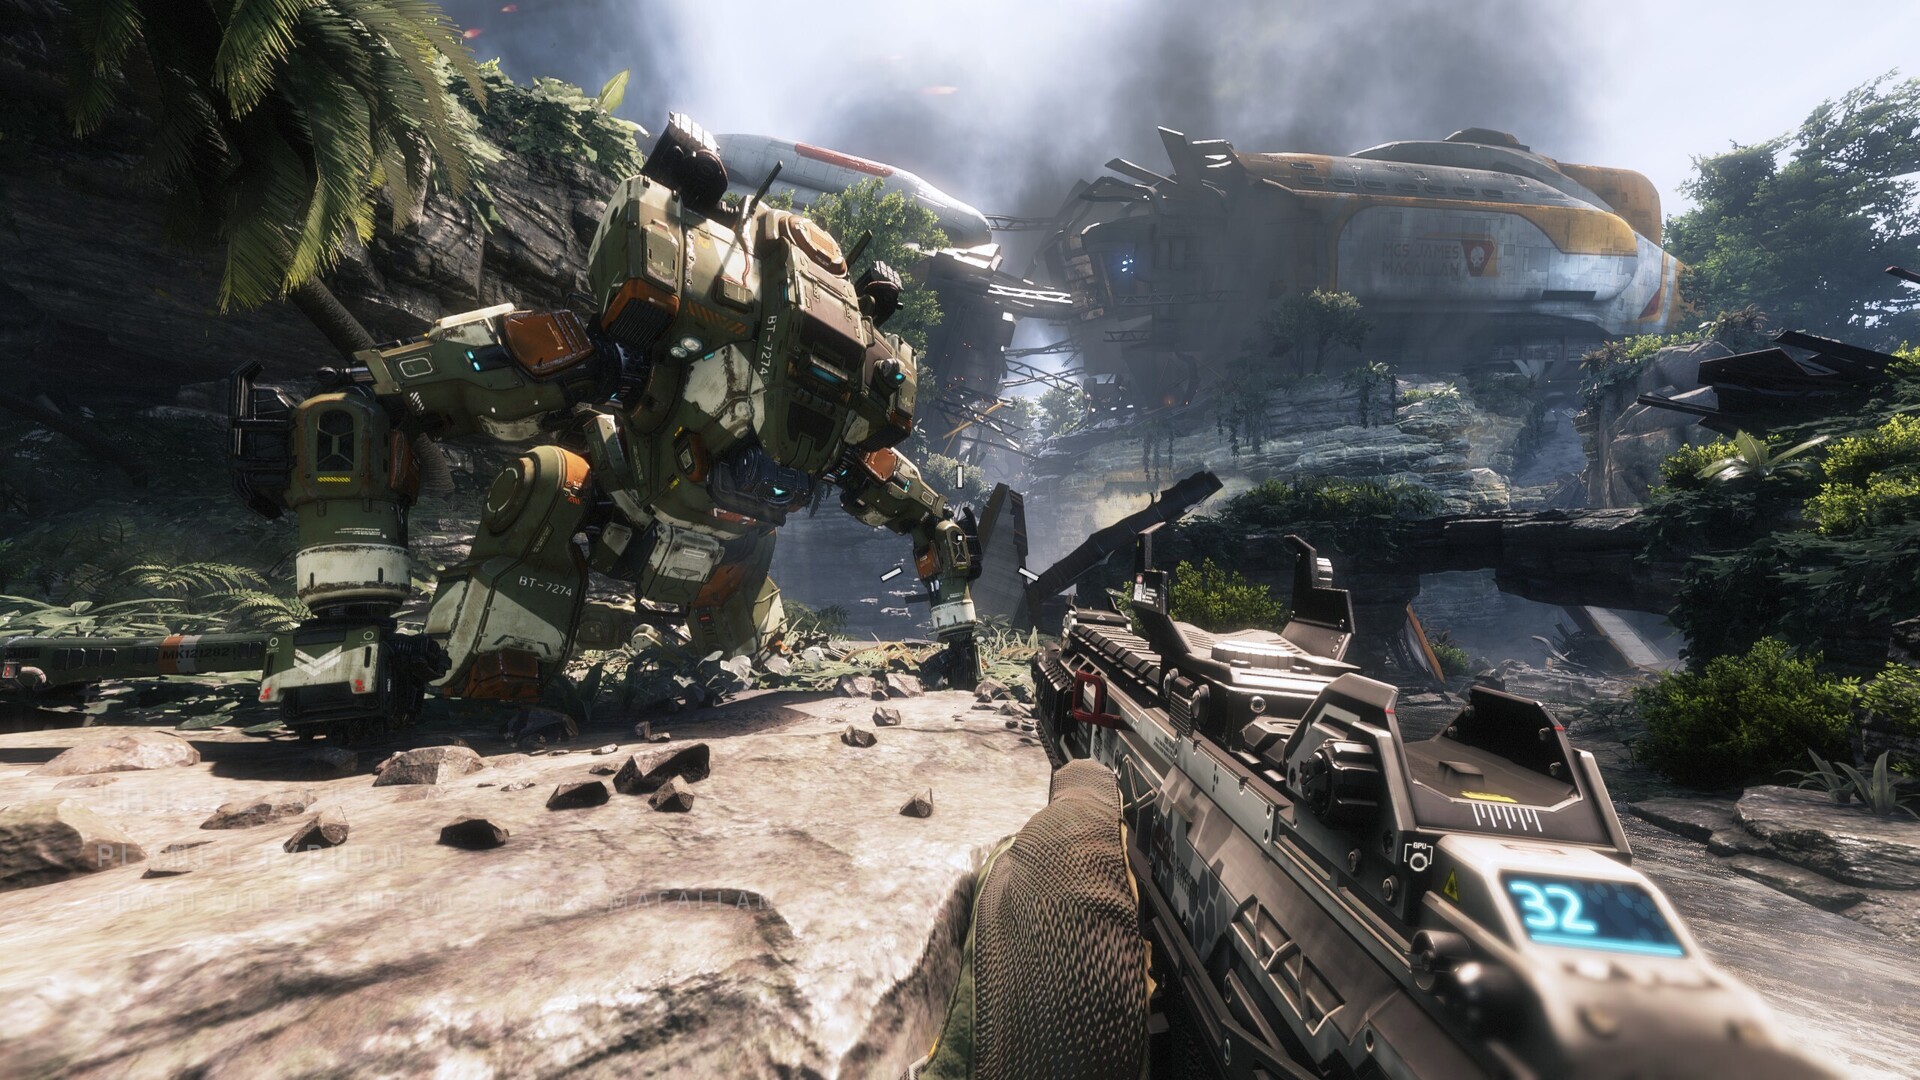 Titanfall 2 online multiplayer supposedly fixed by Respawn